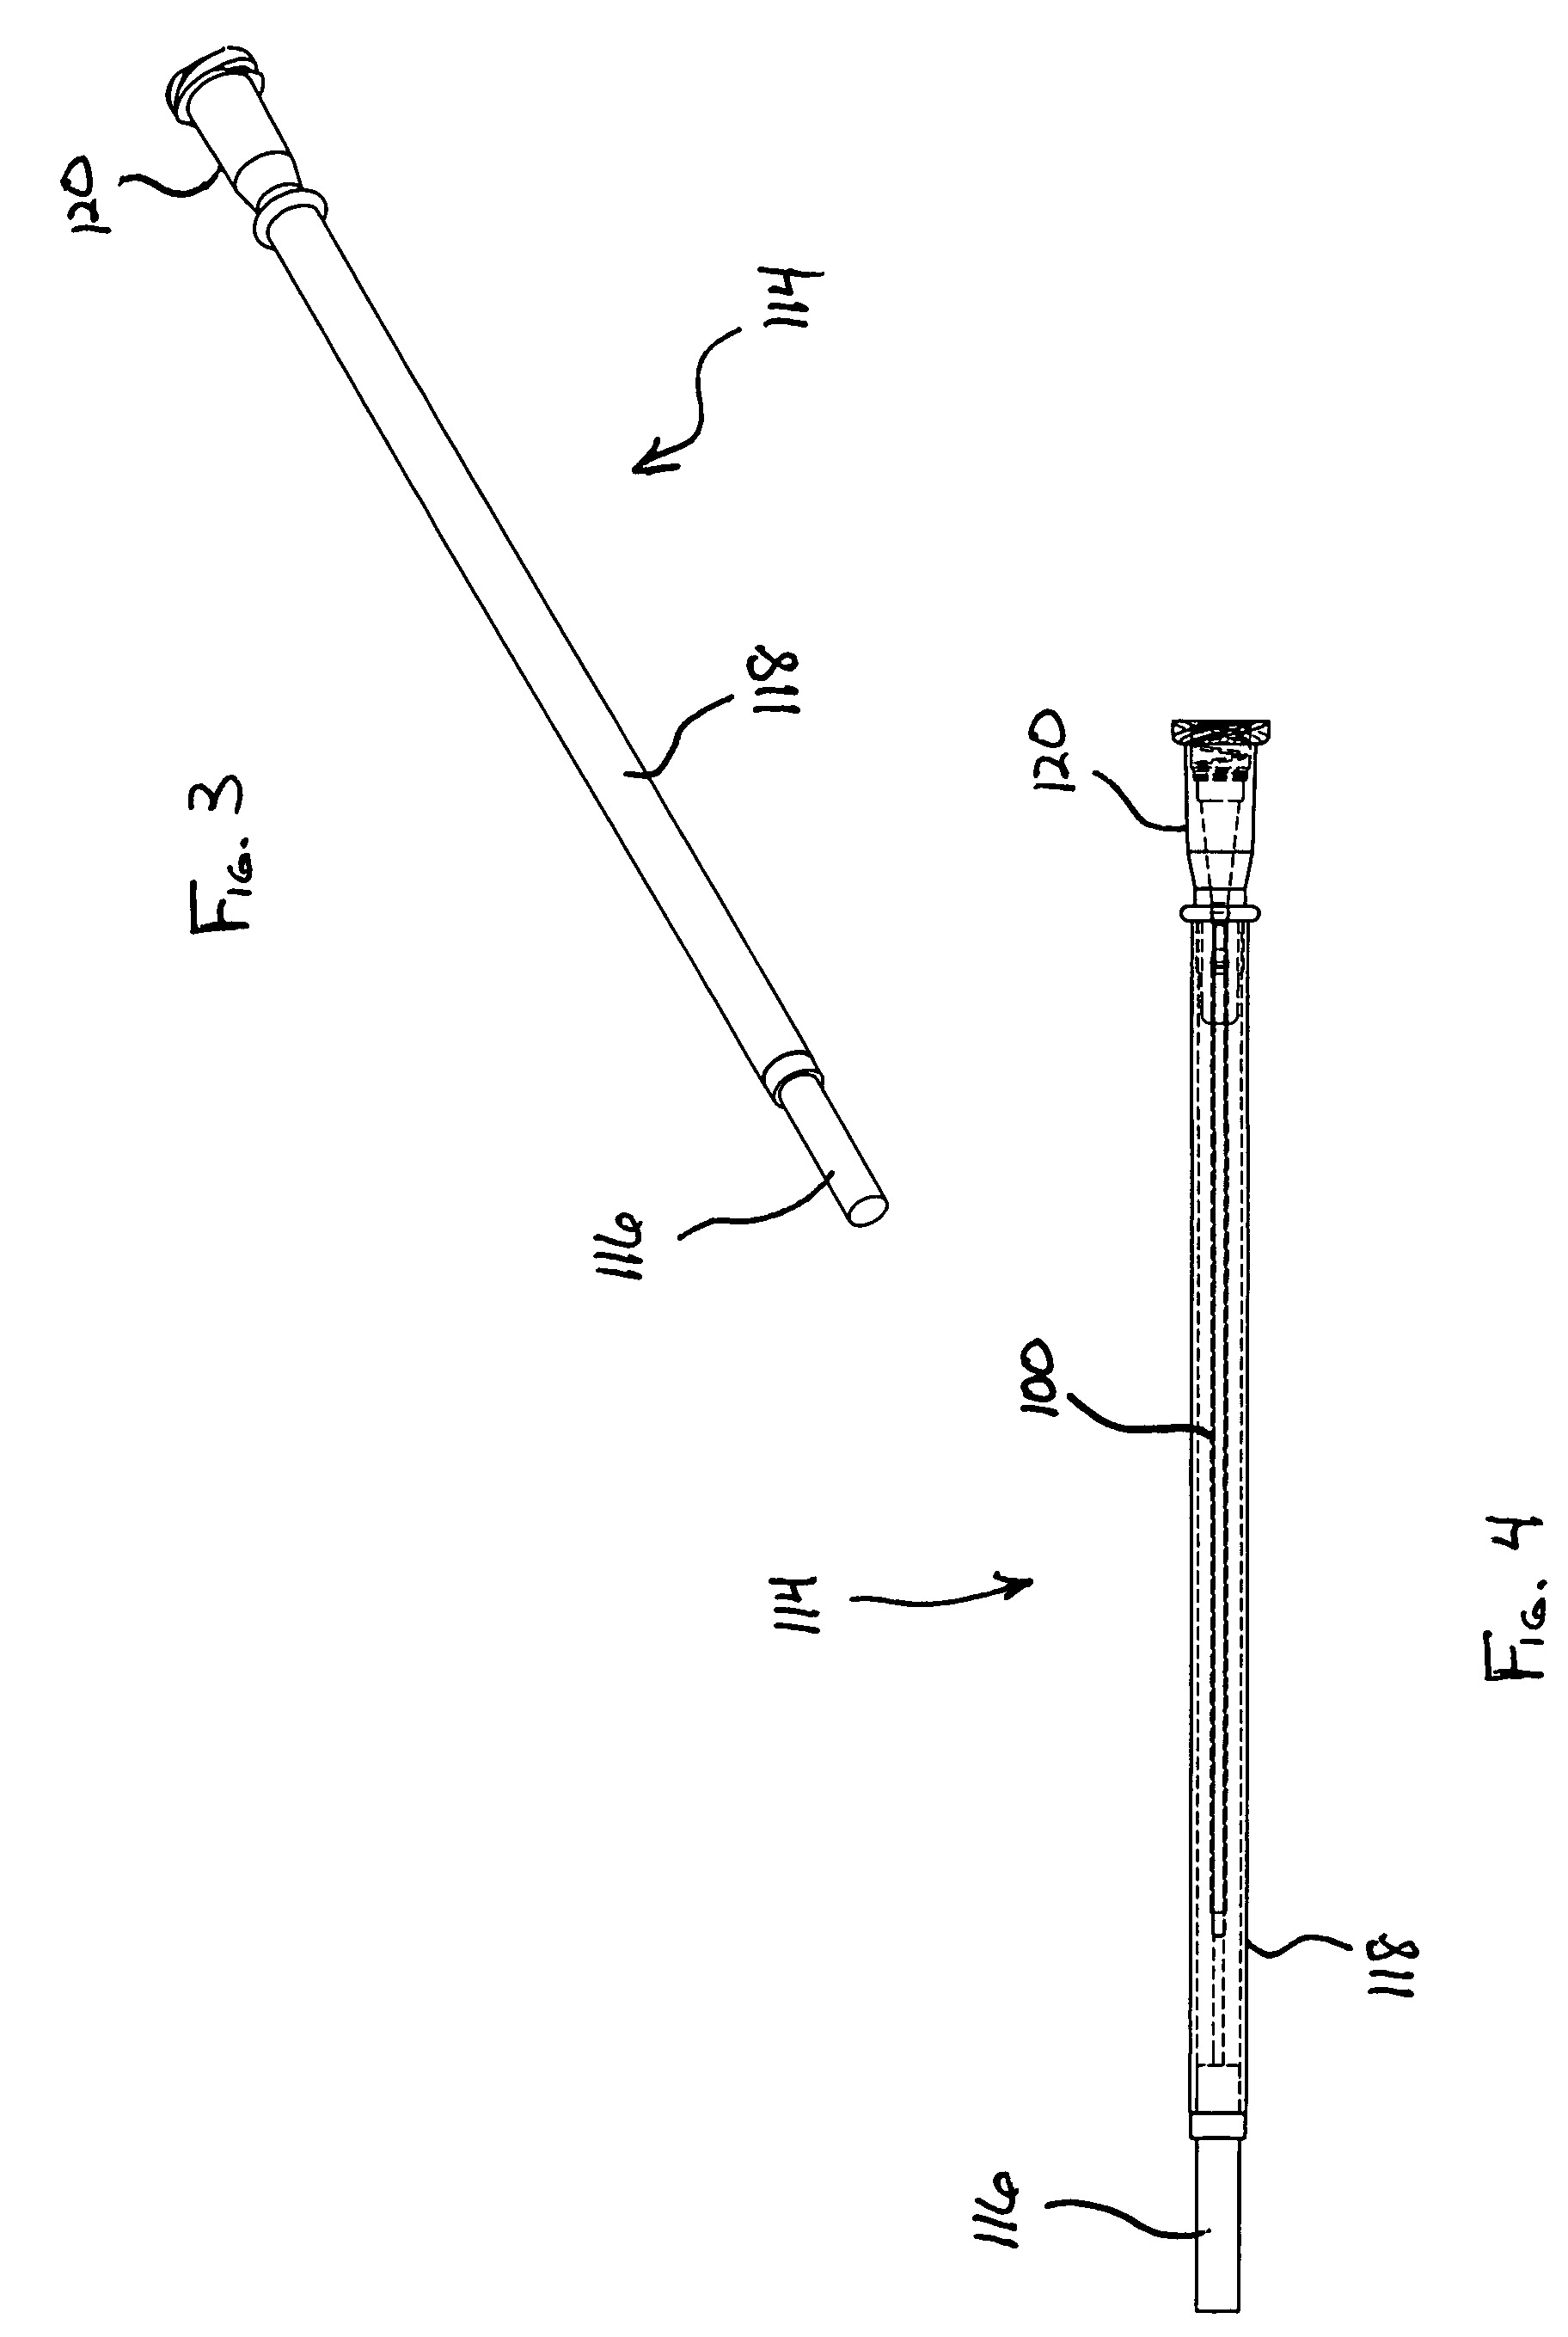 Selectively loadable/sealable bioresorbable carrier assembly for radioisotope seeds